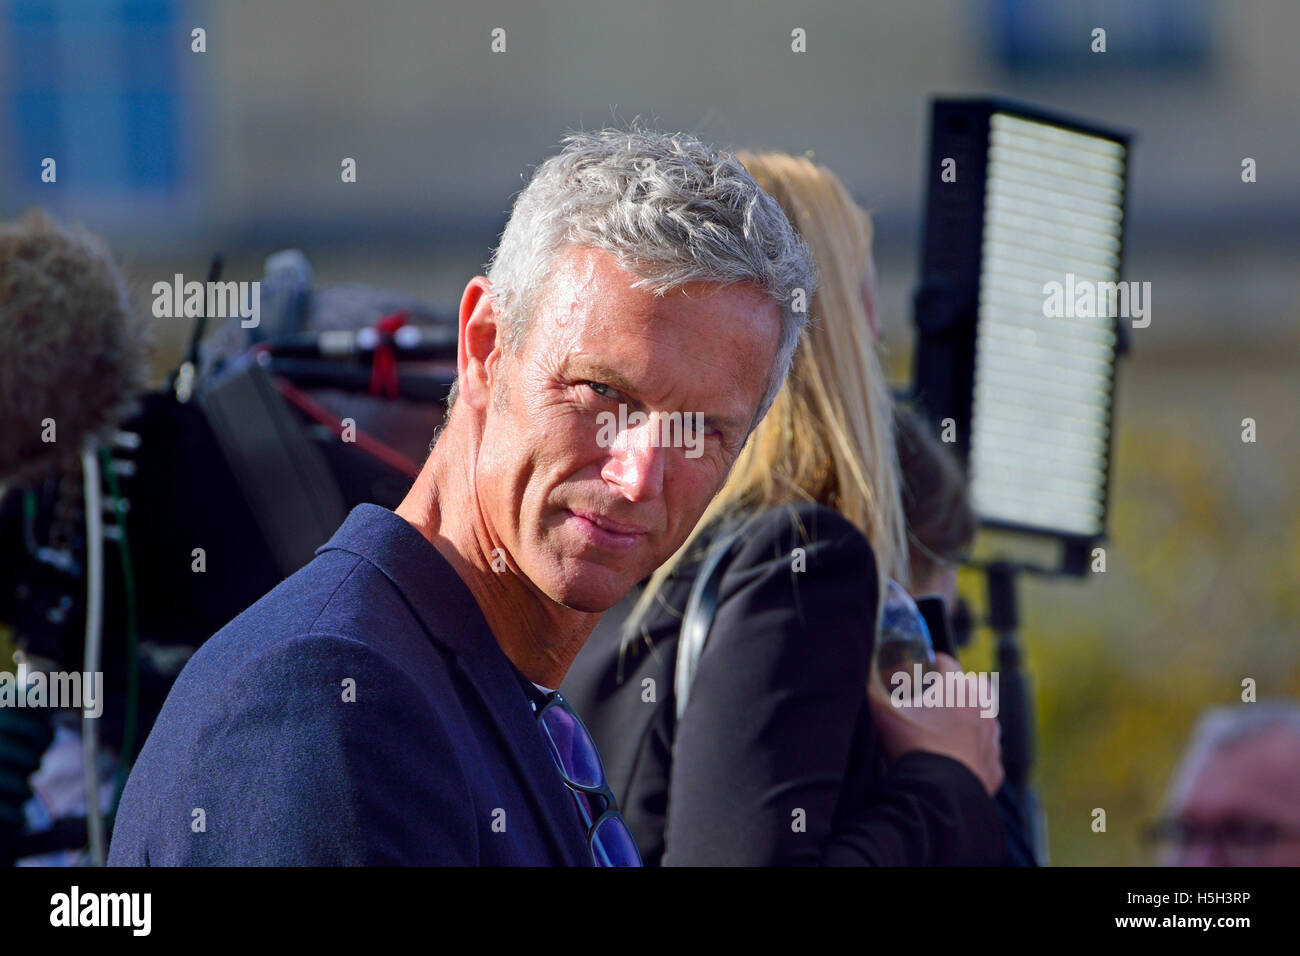 Mark Foster - BBC sports commentator and former Olympic swimmer - at the Heroes Return celebrations for the Rio Olympic and.... Stock Photo